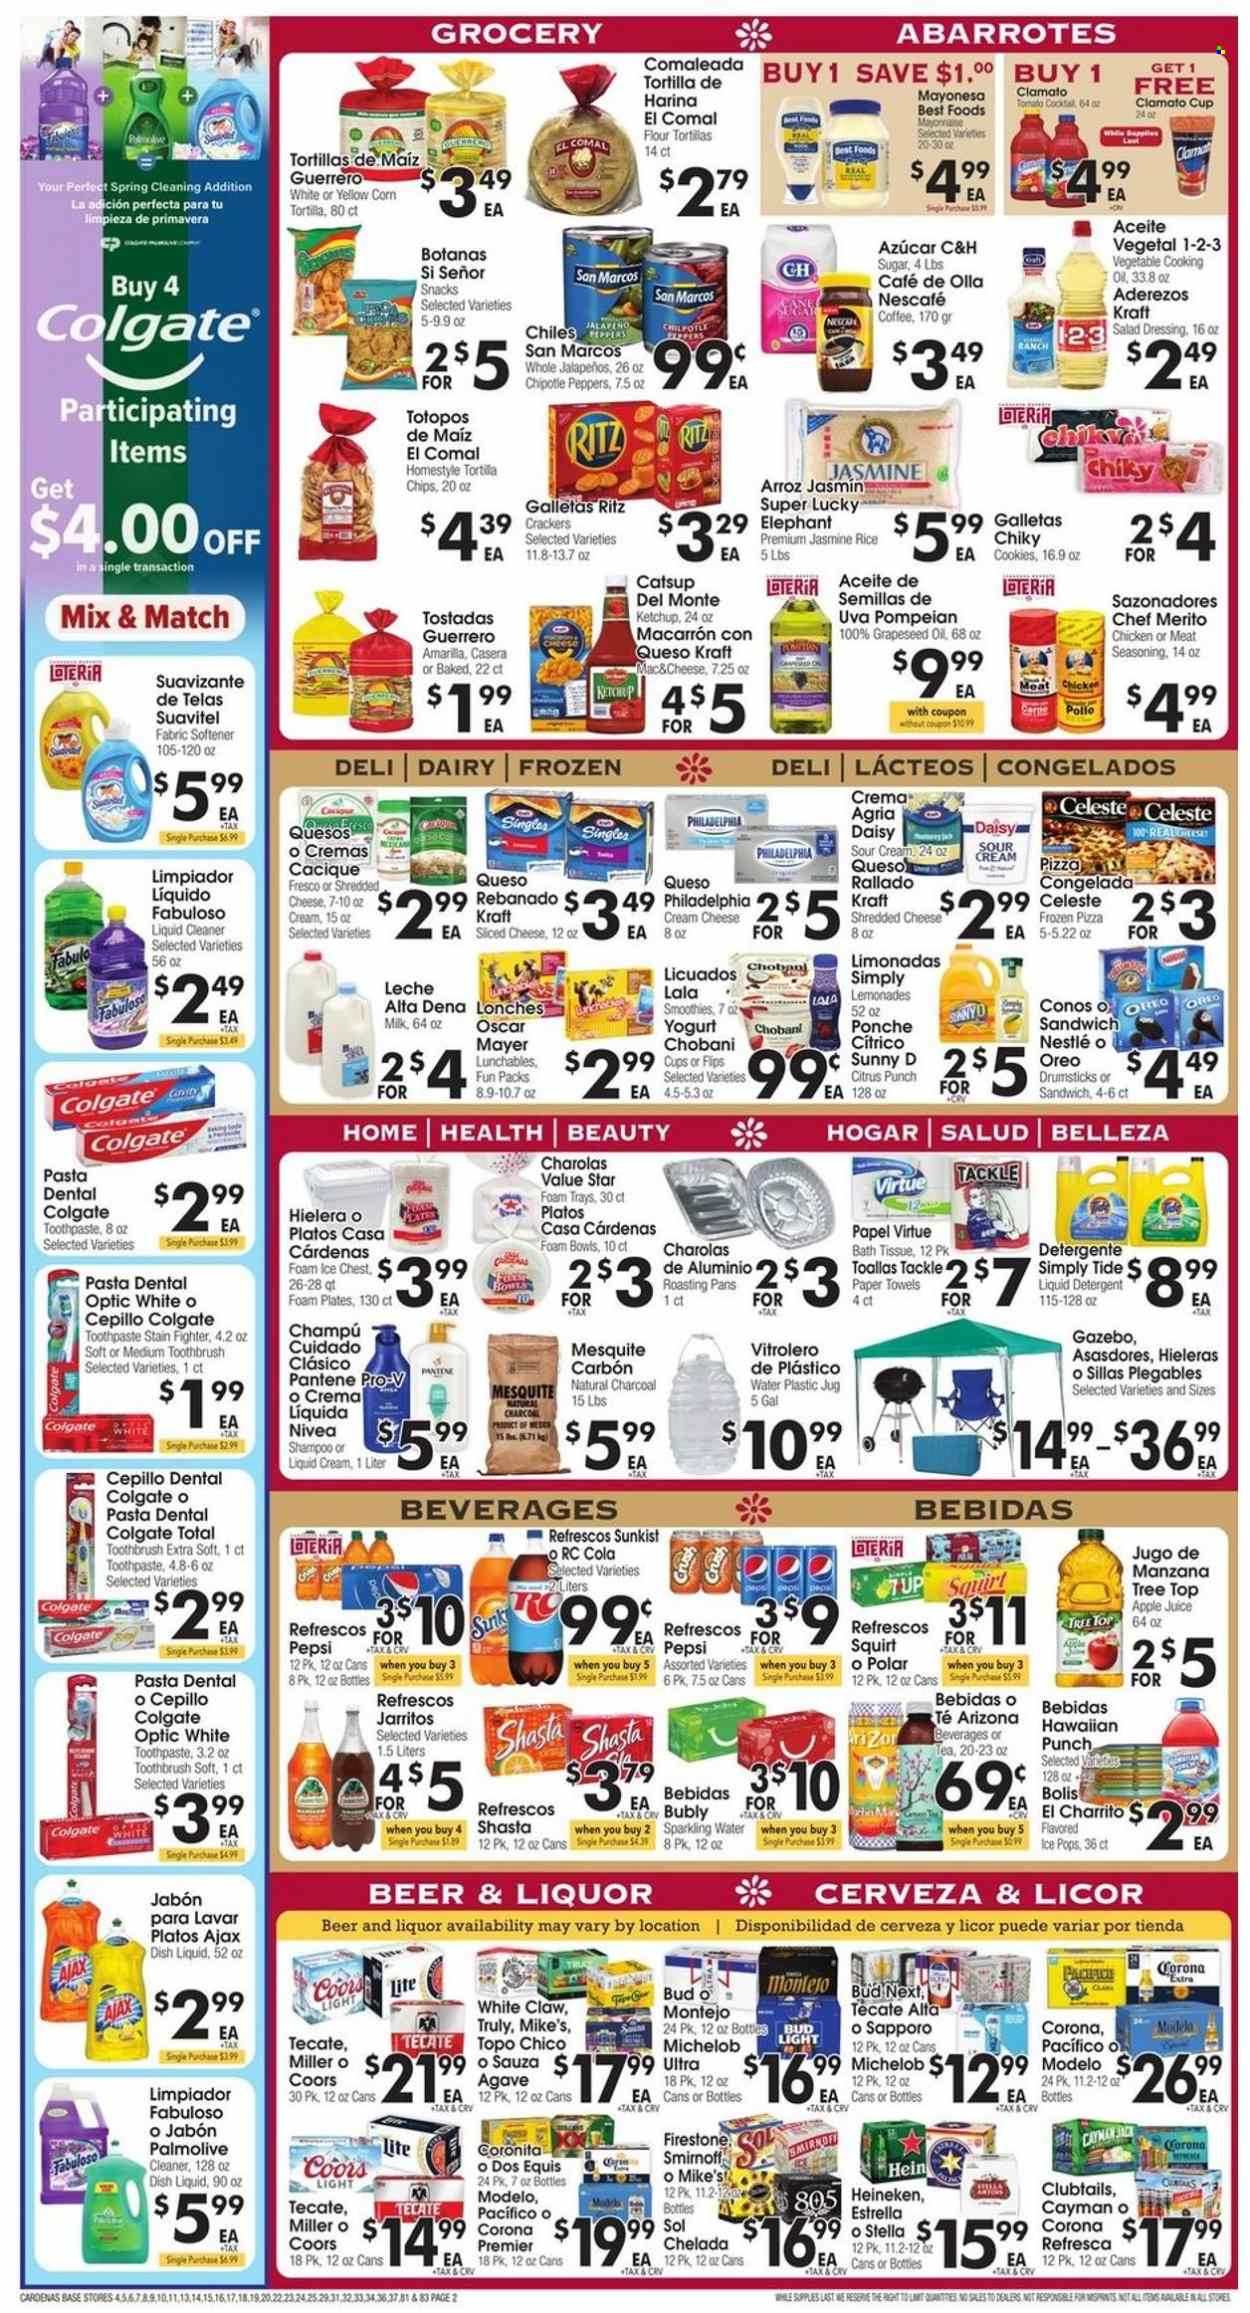 thumbnail - Cardenas Flyer - 05/25/2022 - 05/31/2022 - Sales products - tostadas, Ace, flour tortillas, jalapeño, pizza, sandwich, pasta, Lunchables, Kraft®, Oscar Mayer, shredded cheese, sliced cheese, Philadelphia, Oreo, yoghurt, Chobani, milk, sour cream, mayonnaise, Celeste, cookies, Nestlé, snack, crackers, RITZ, tortilla chips, sugar, rice, jasmine rice, spice, salad dressing, ketchup, dressing, grape seed oil, cooking oil, apple juice, Pepsi, juice, Clamato, AriZona, fruit punch, smoothie, sparkling water, green tea, tea, coffee, Nescafé, red wine, wine, Smirnoff, liquor, White Claw, TRULY, beer, Corona Extra, Heineken, Miller, Sol, Modelo, bath tissue, kitchen towels, paper towels, detergent, cleaner, liquid cleaner, Ajax, Fabuloso, Tide, fabric softener, liquid detergent, dishwashing liquid, shampoo, Palmolive, Colgate, toothbrush, toothpaste, Nivea, Pantene, plate, cup, foam plates, Coors, Dos Equis, Michelob. Page 2.